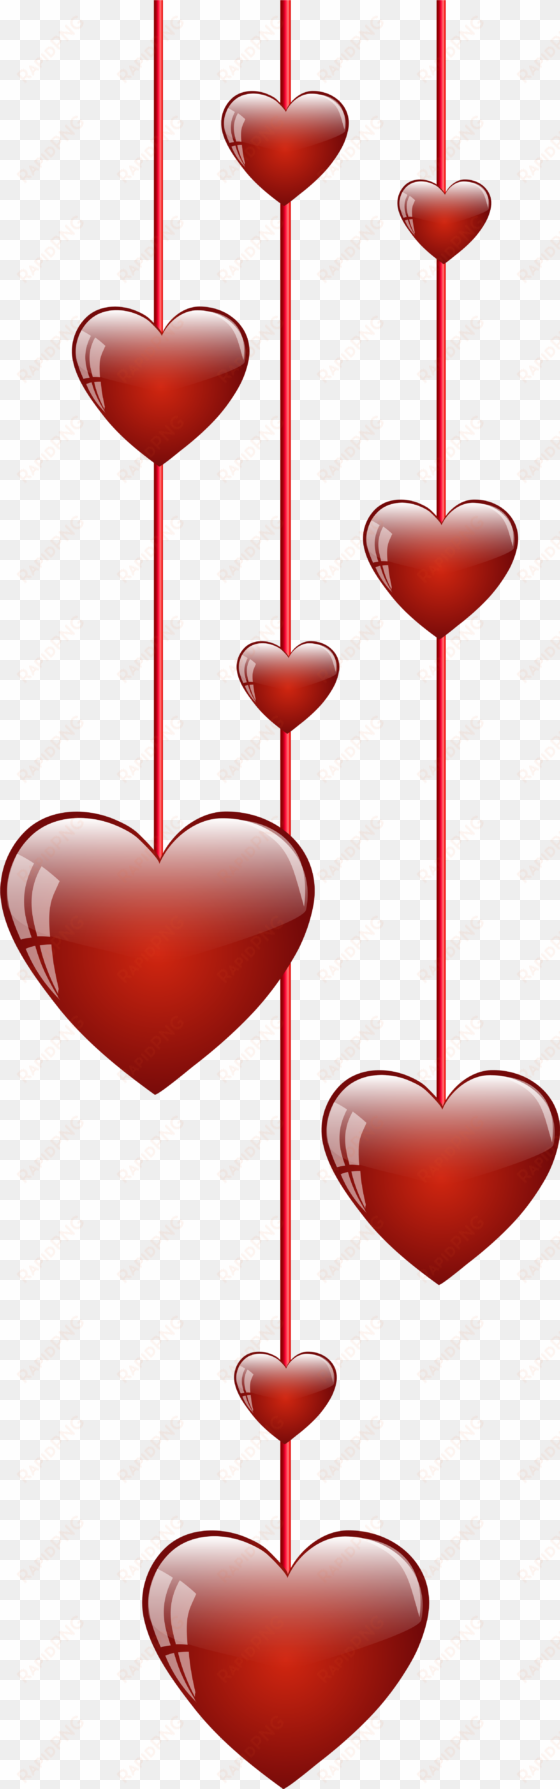 Tborges Happypeople Haertballoons - Hanging Hearts transparent png image